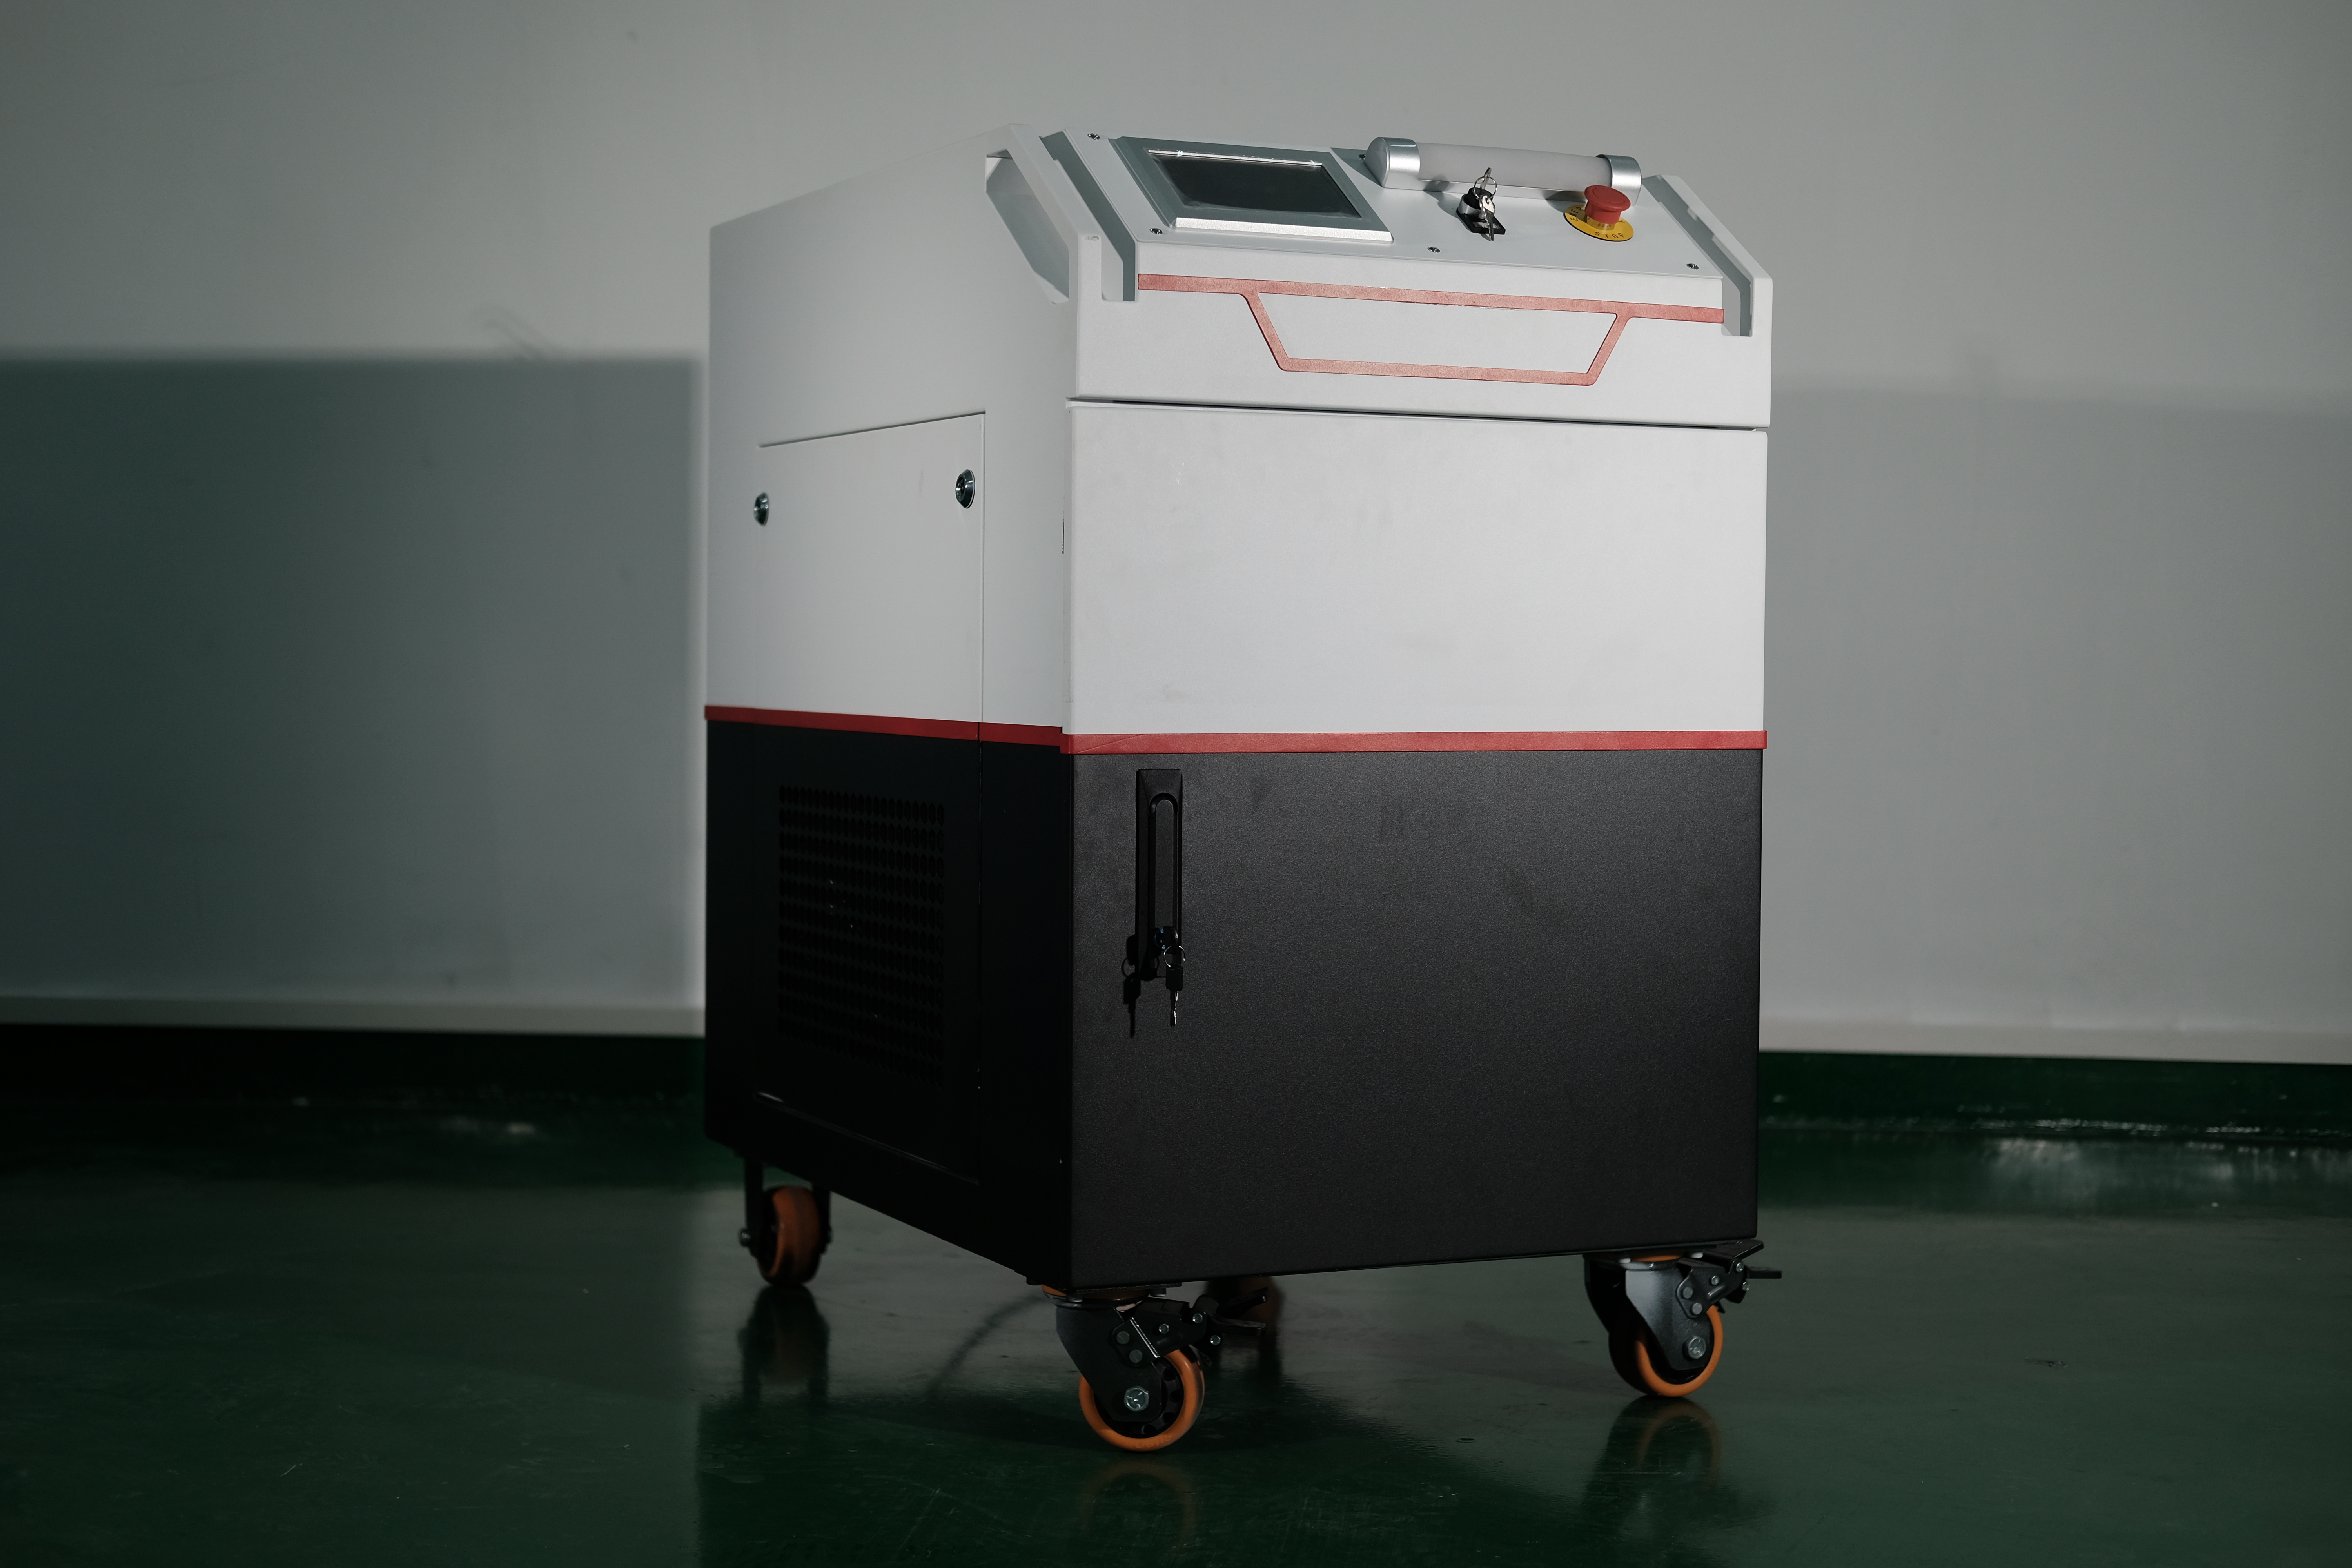 What are the advantages of using a laser cleaning machine for surface preparation?